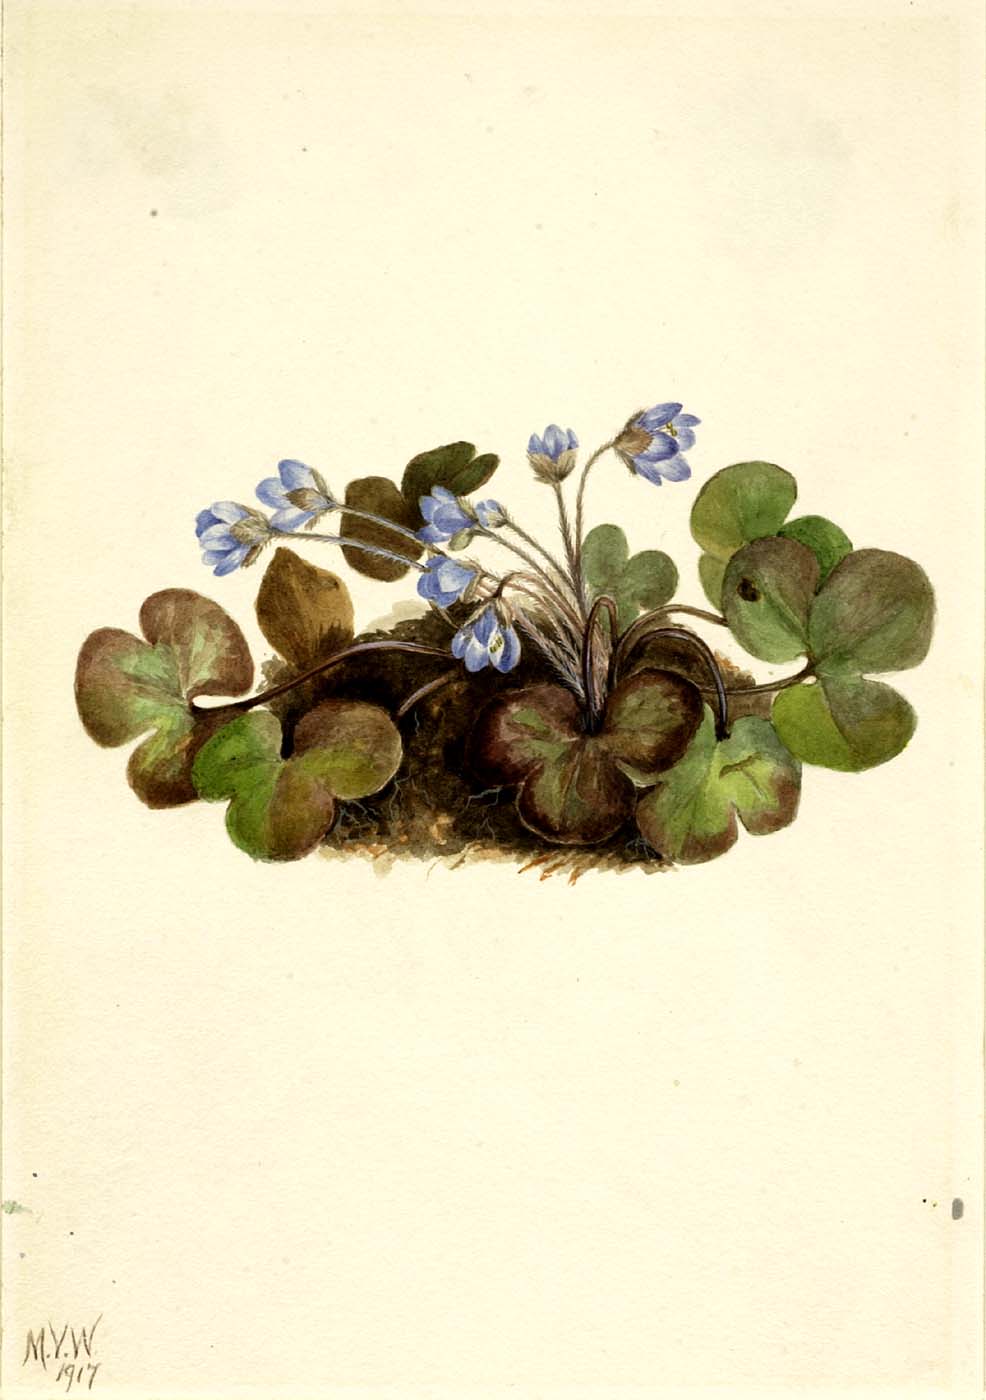 11917 Hepatica americana (Round-lobed) illustration by Mary Vaux Walcot.